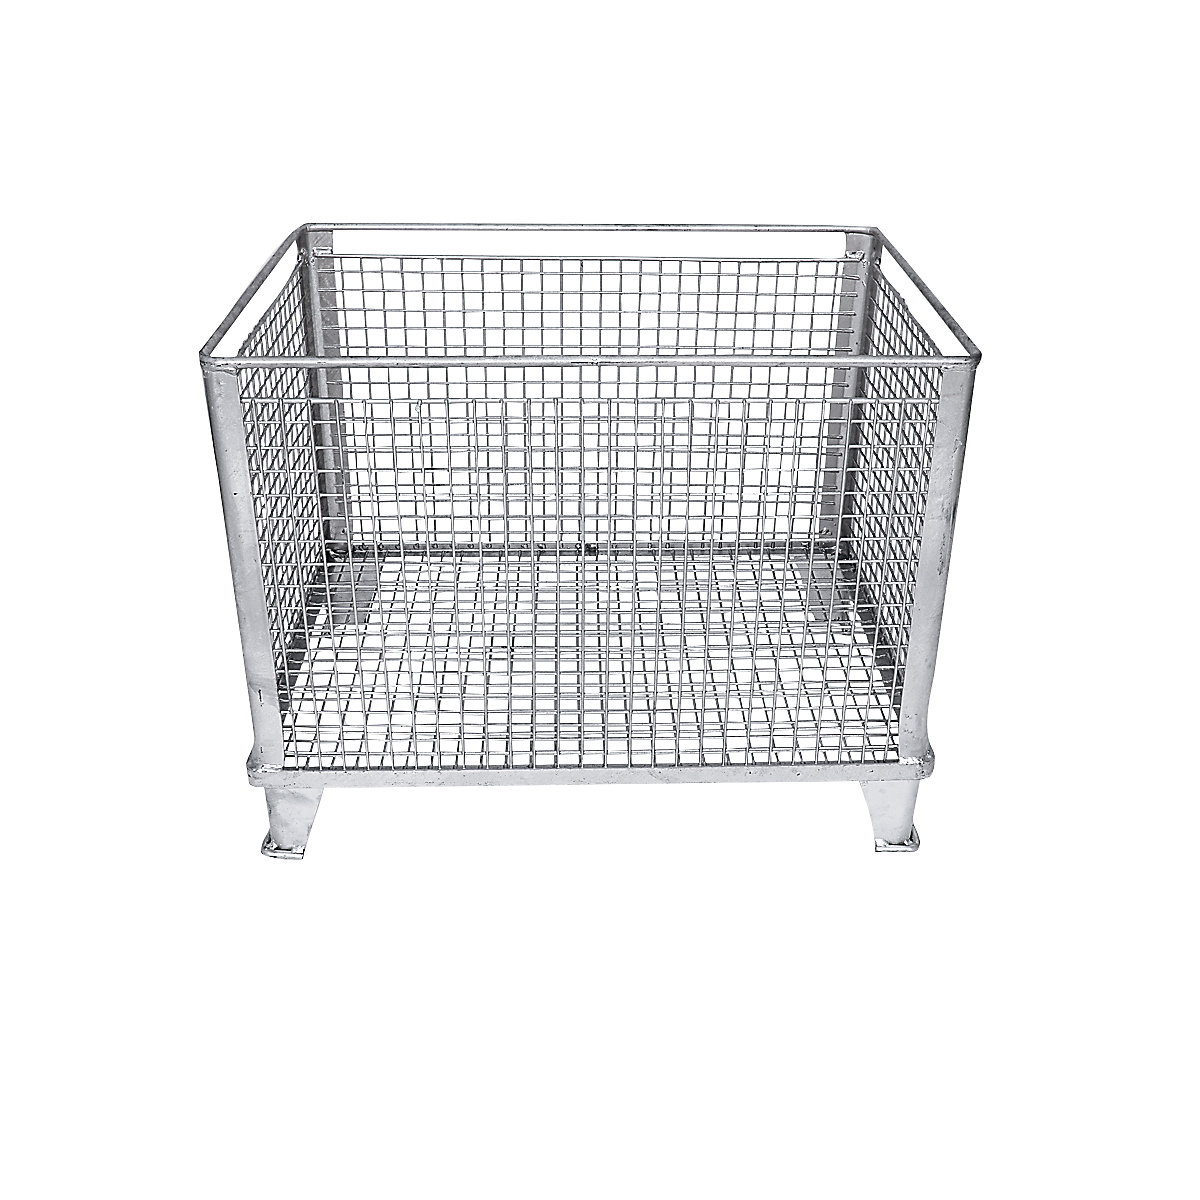 Stacking basket for heavy items, narrow mesh size, external dims. LxWxH 815 x 565 x 625 mm-4